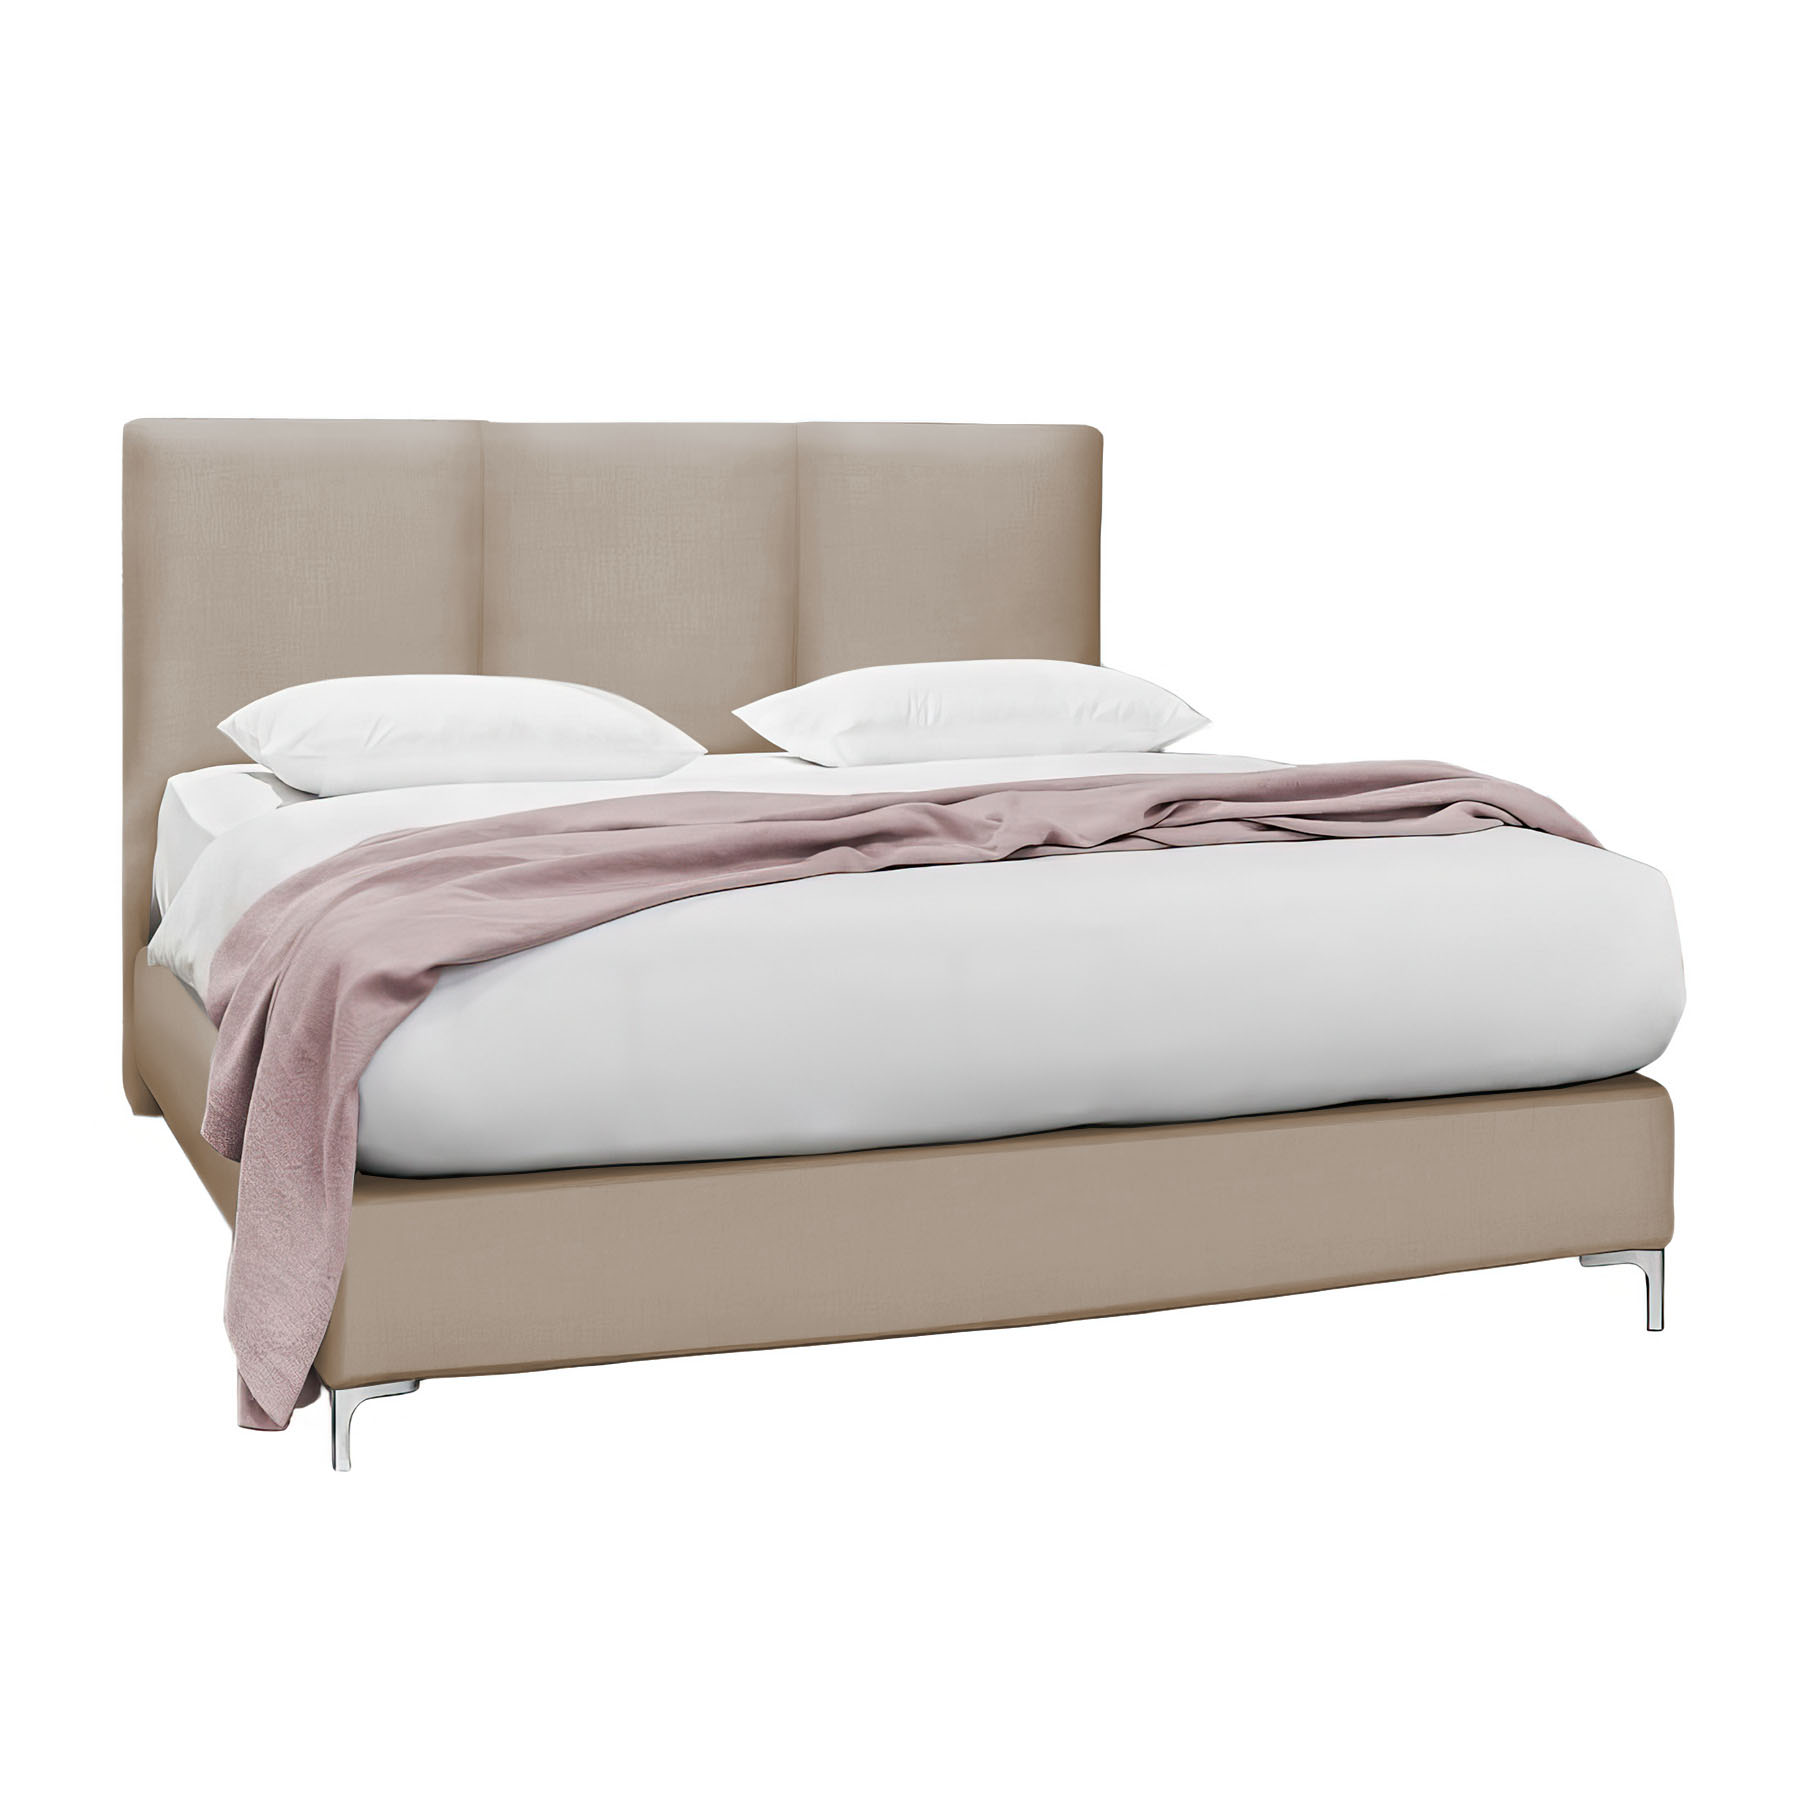 Boxspringbett Kate Select 160/200cm in Hot Madison Taupe